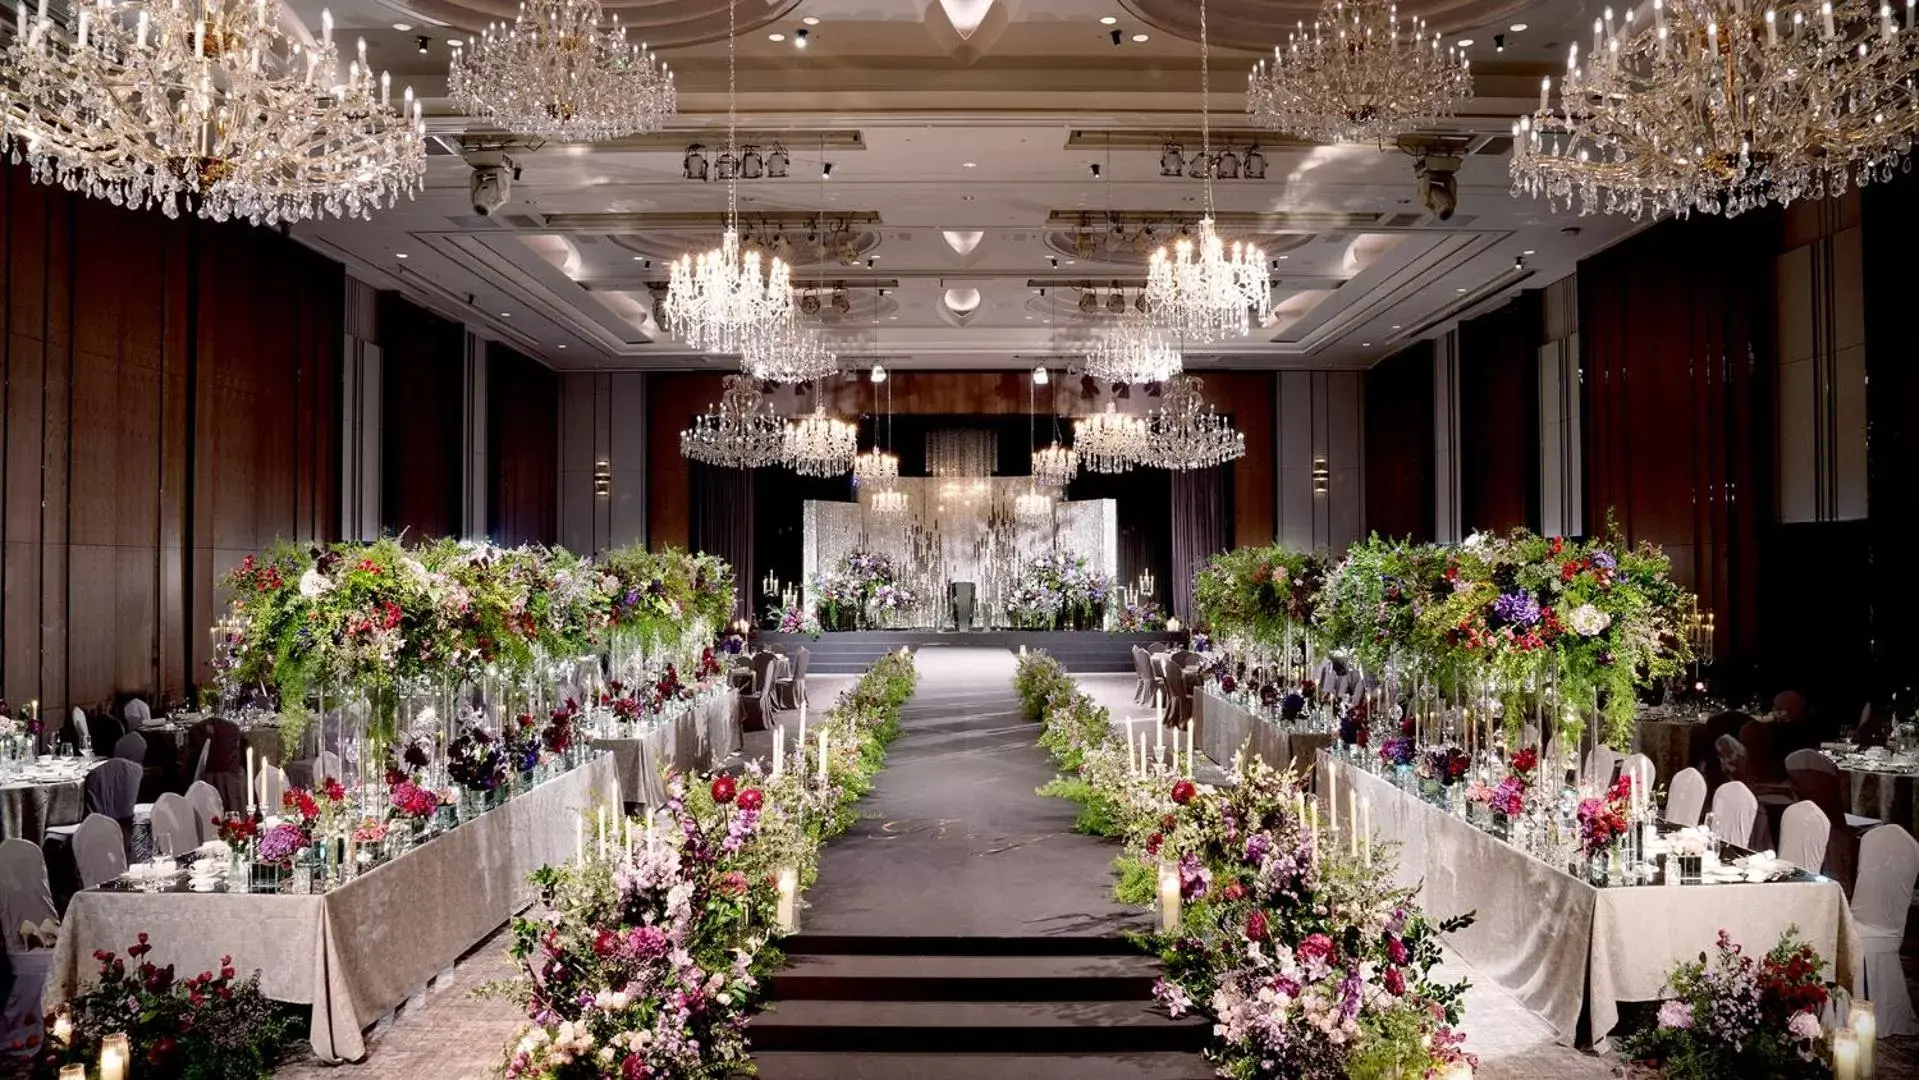 Banquet/Function facilities, Banquet Facilities in Lotte Hotel World